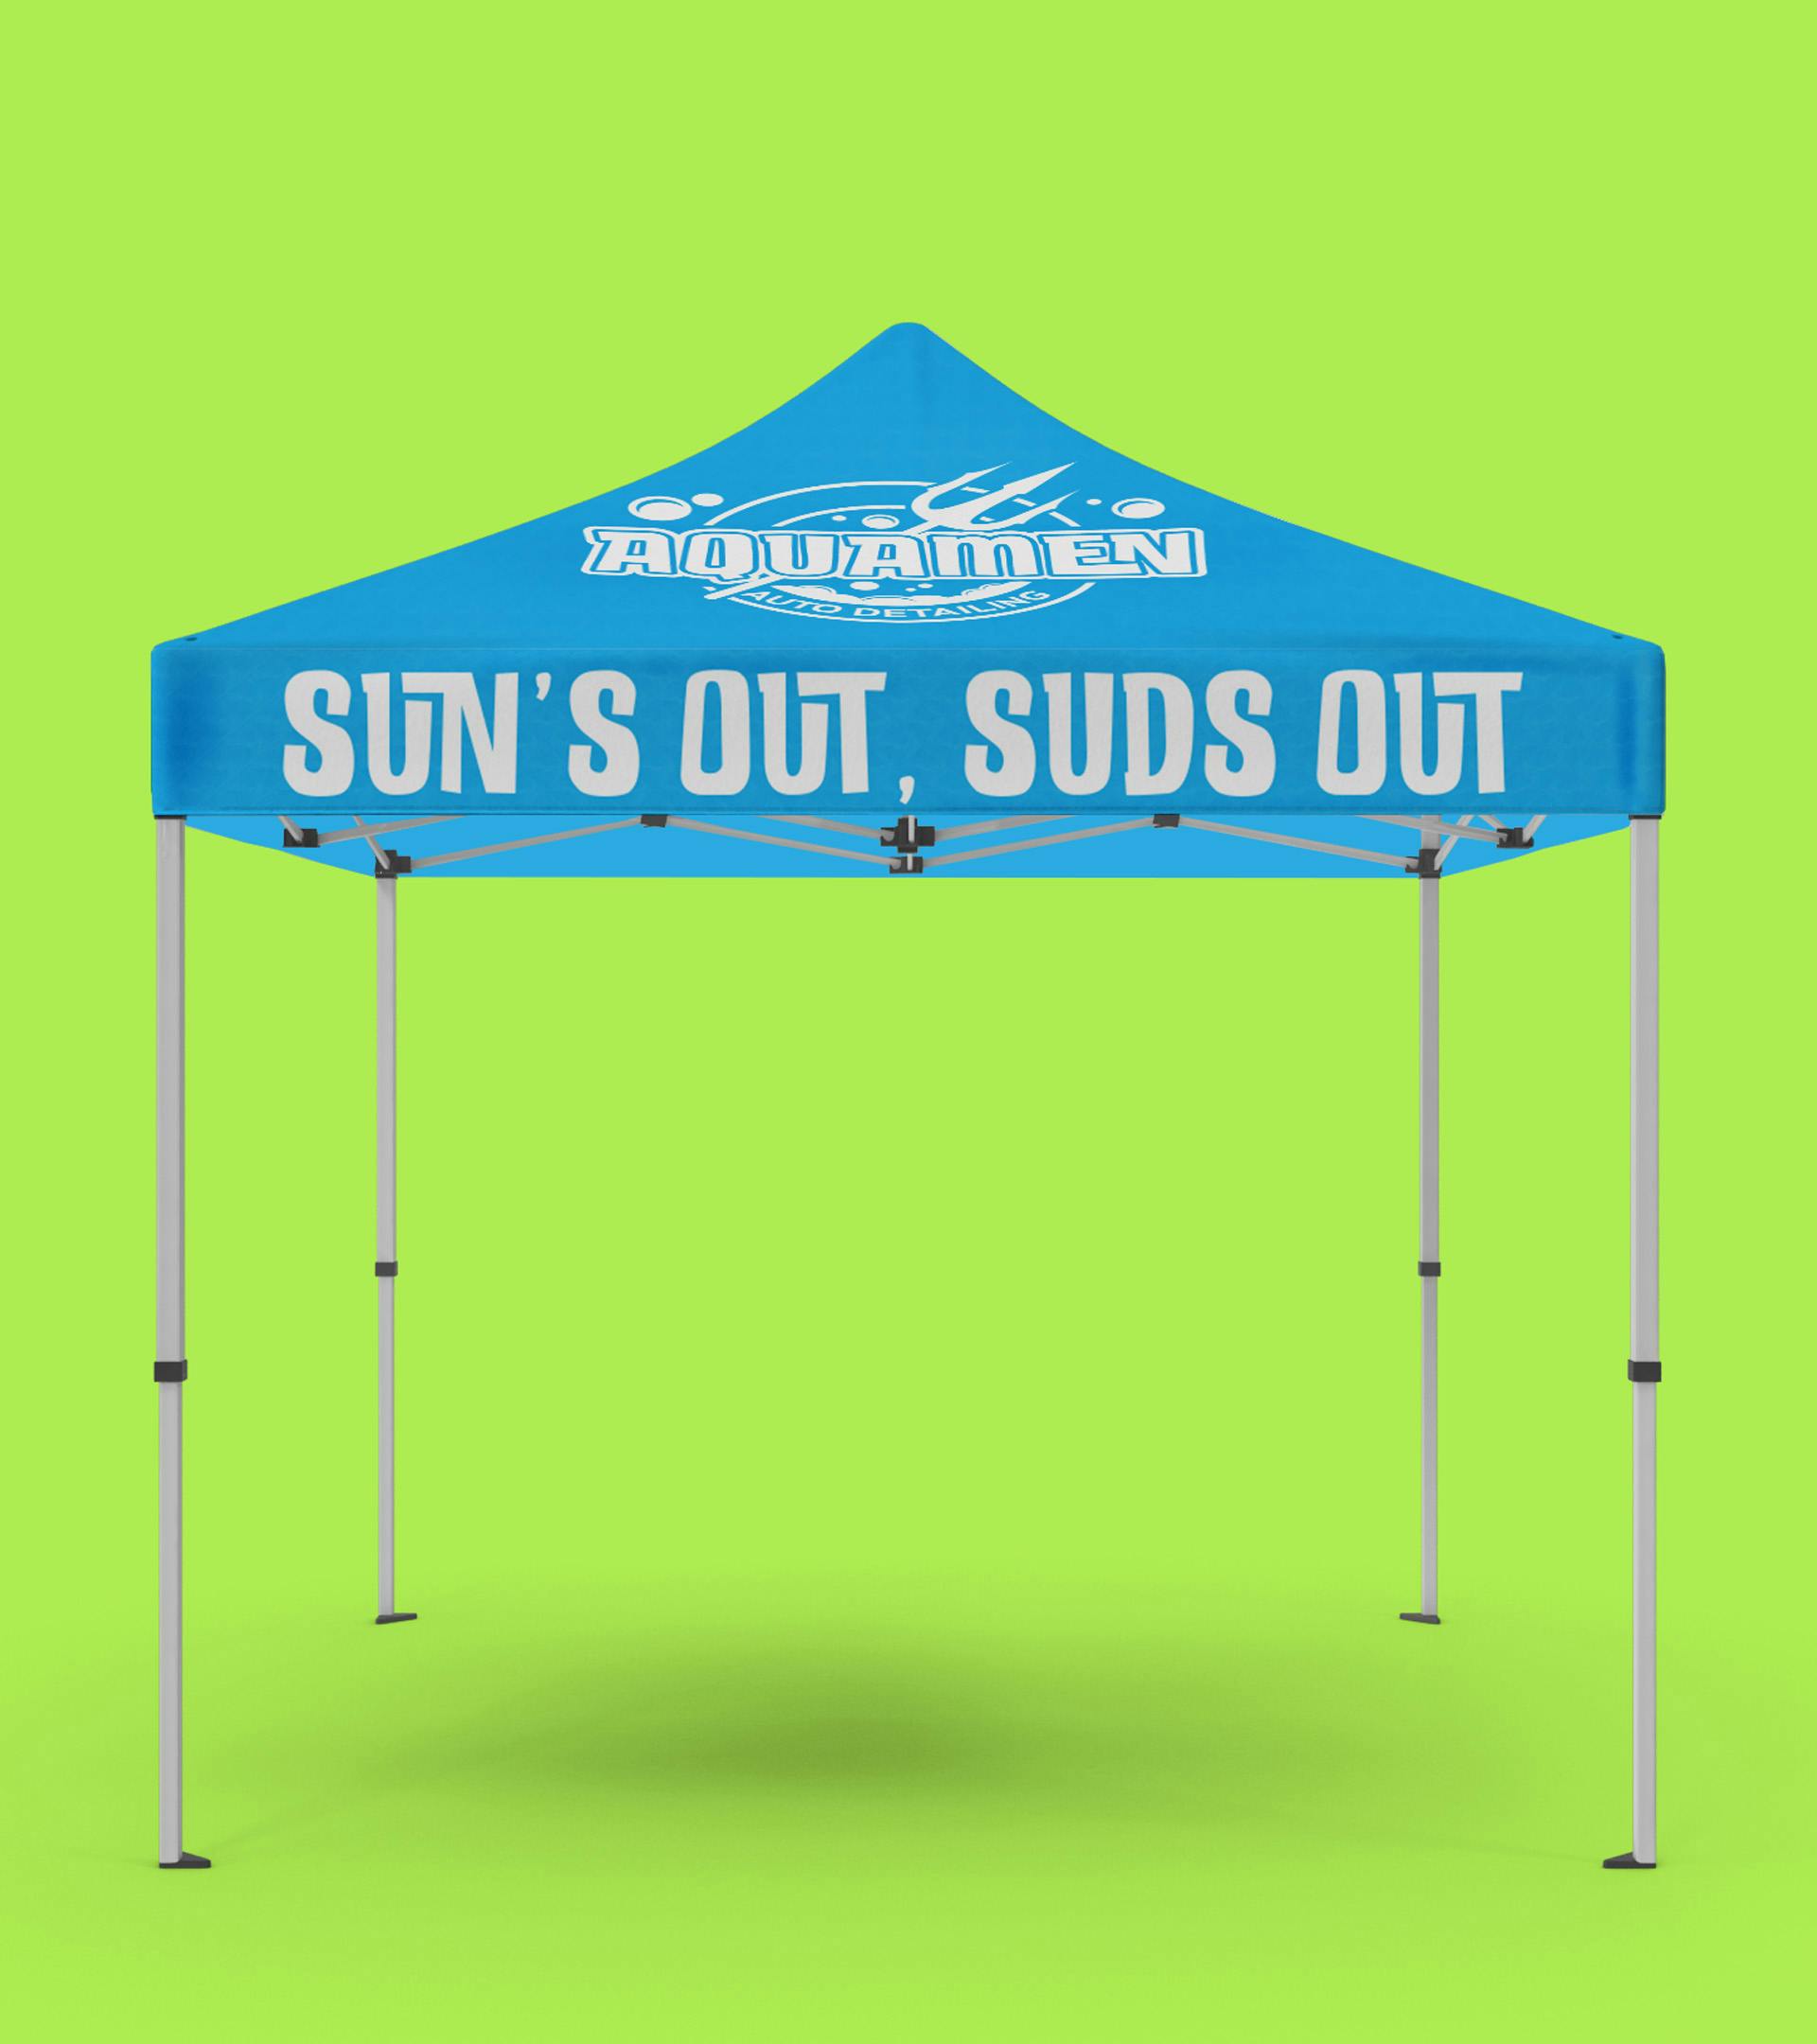 Tent for Aquamen, showing one side with the logo on the canopy and "Sun's out, Suds out" on the side